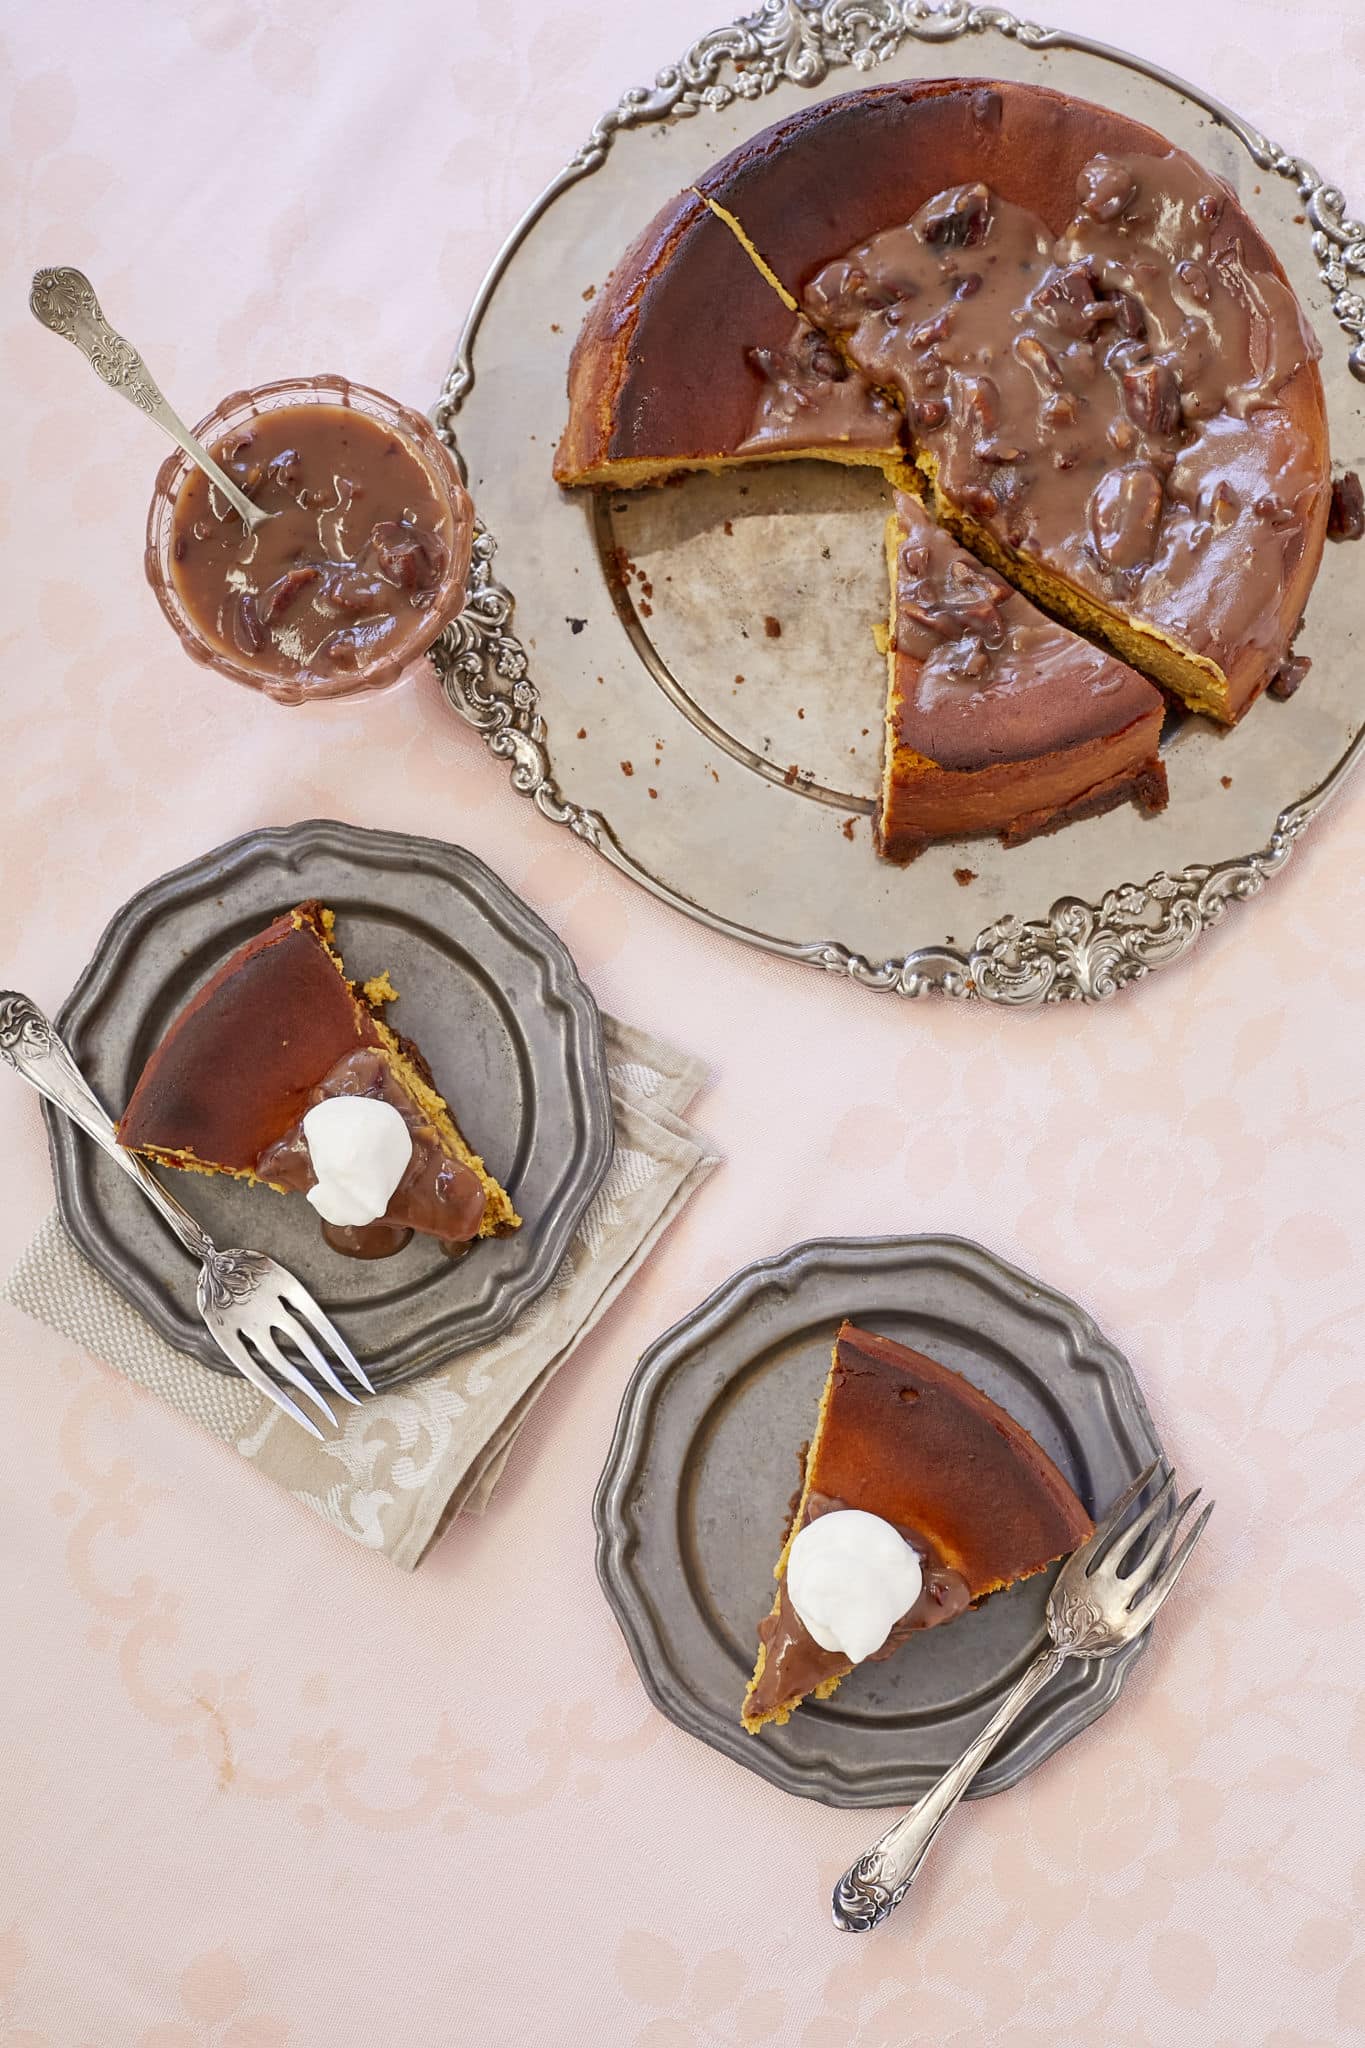 Homemade pumpkin cheesecake with pecan praline sauce is served on a platter. Two slices are dolloped in homemade whipped cream.